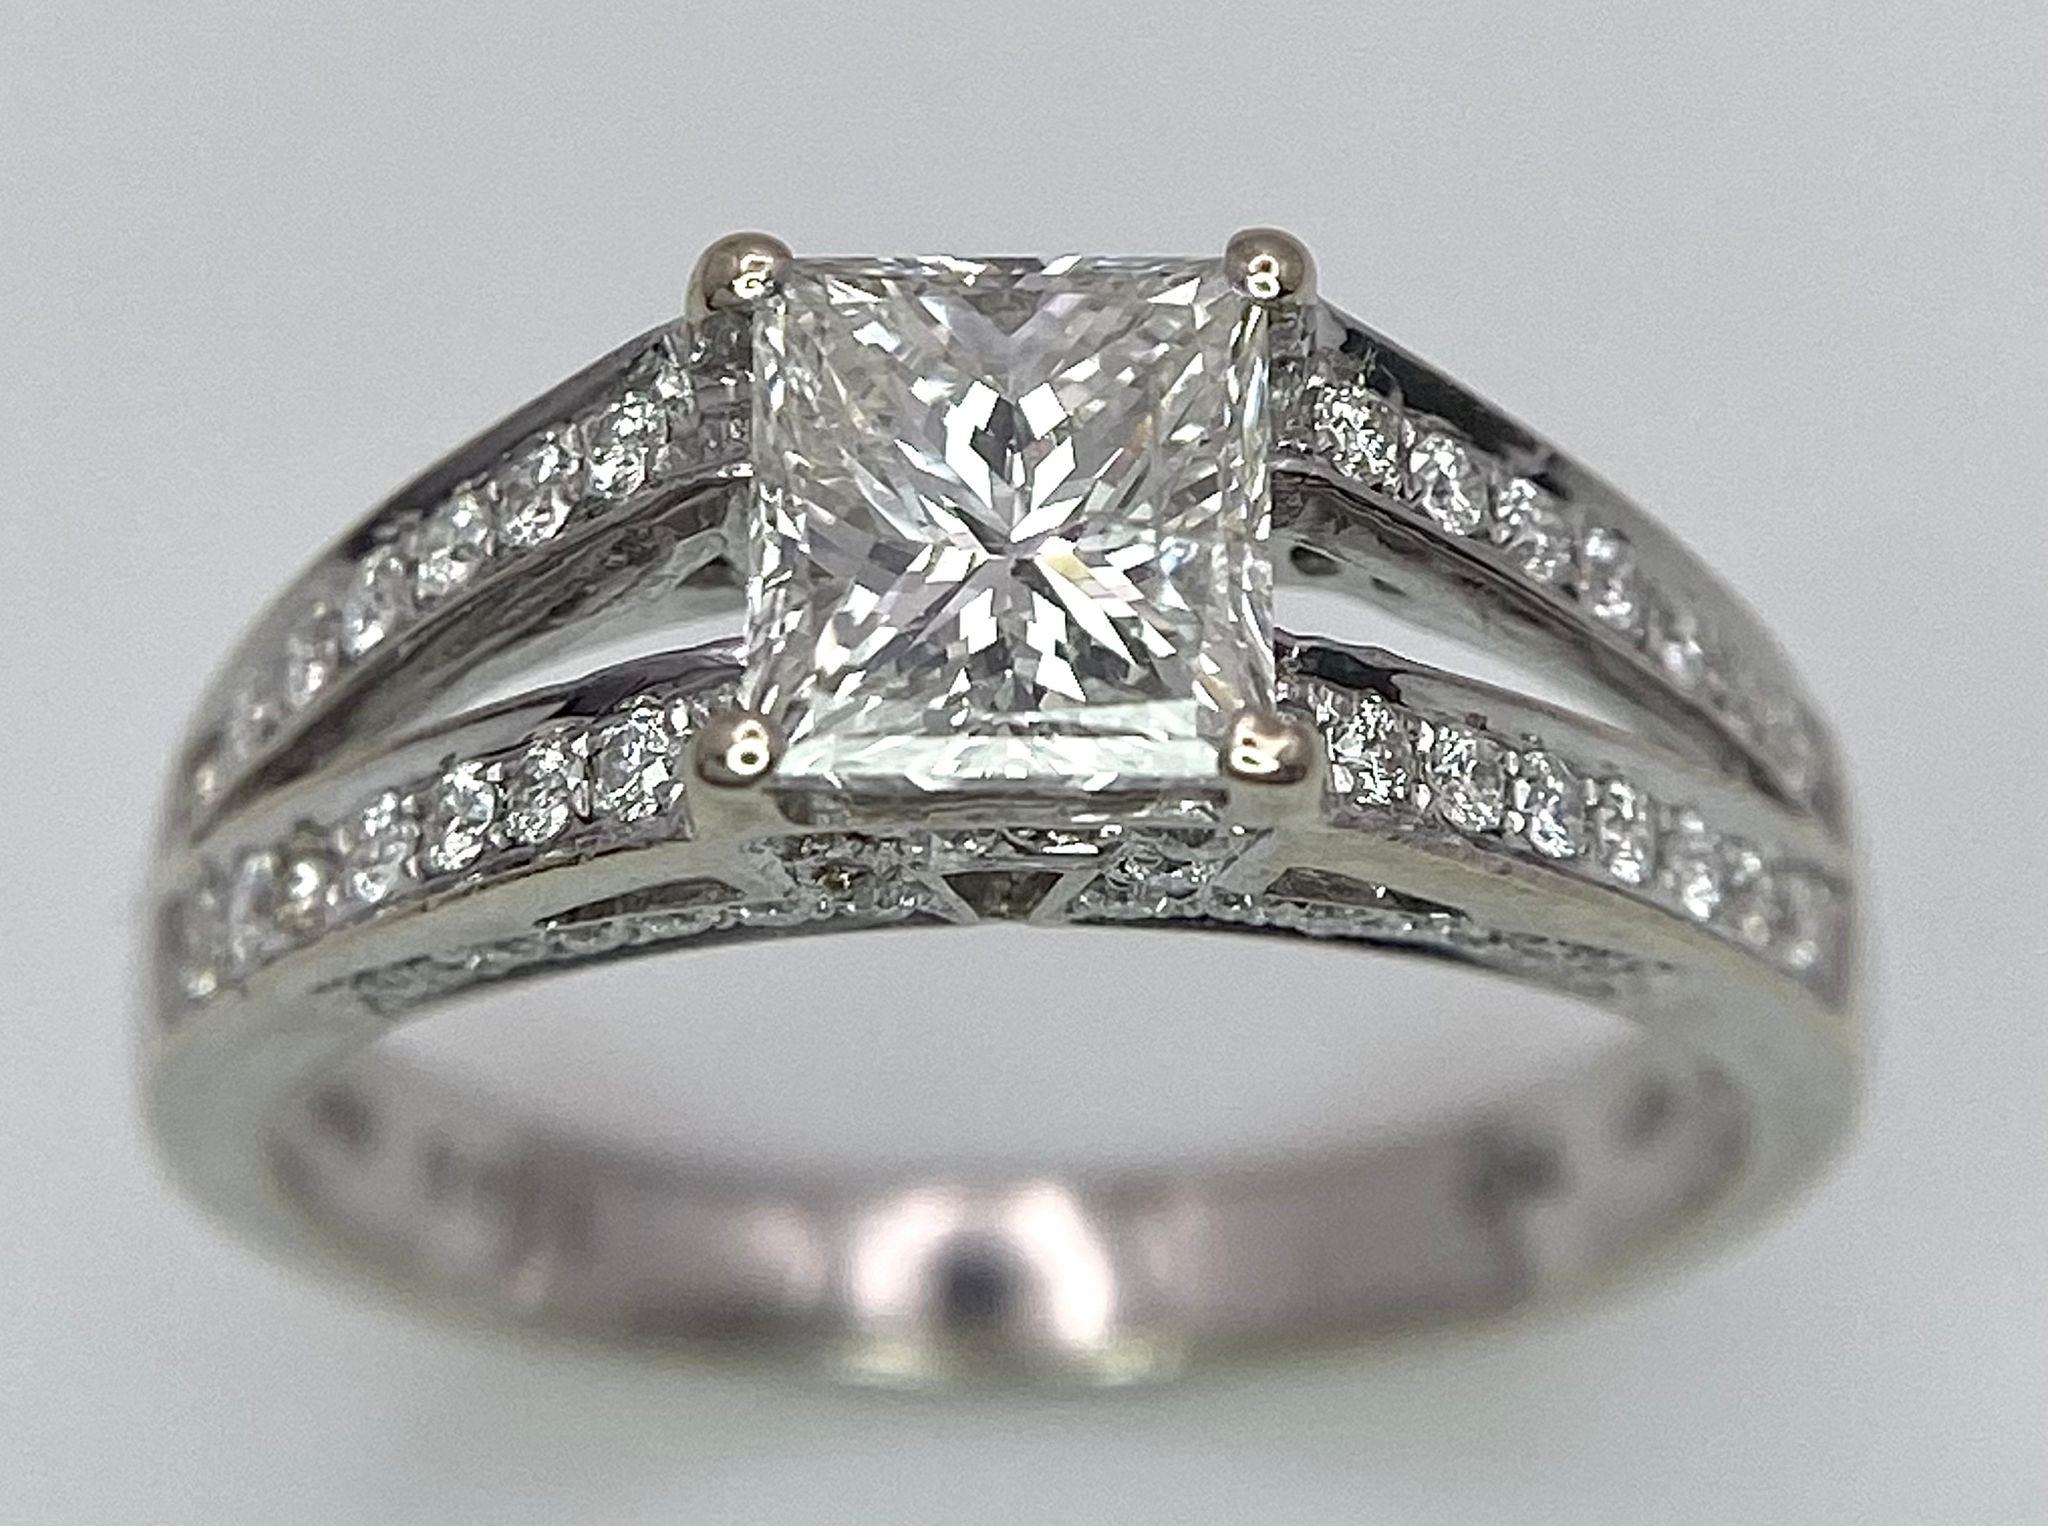 An 18K White Gold Diamond Ring. Central VS2 1ct Princess Cut Near White Diamond with Round Cut - Image 2 of 10